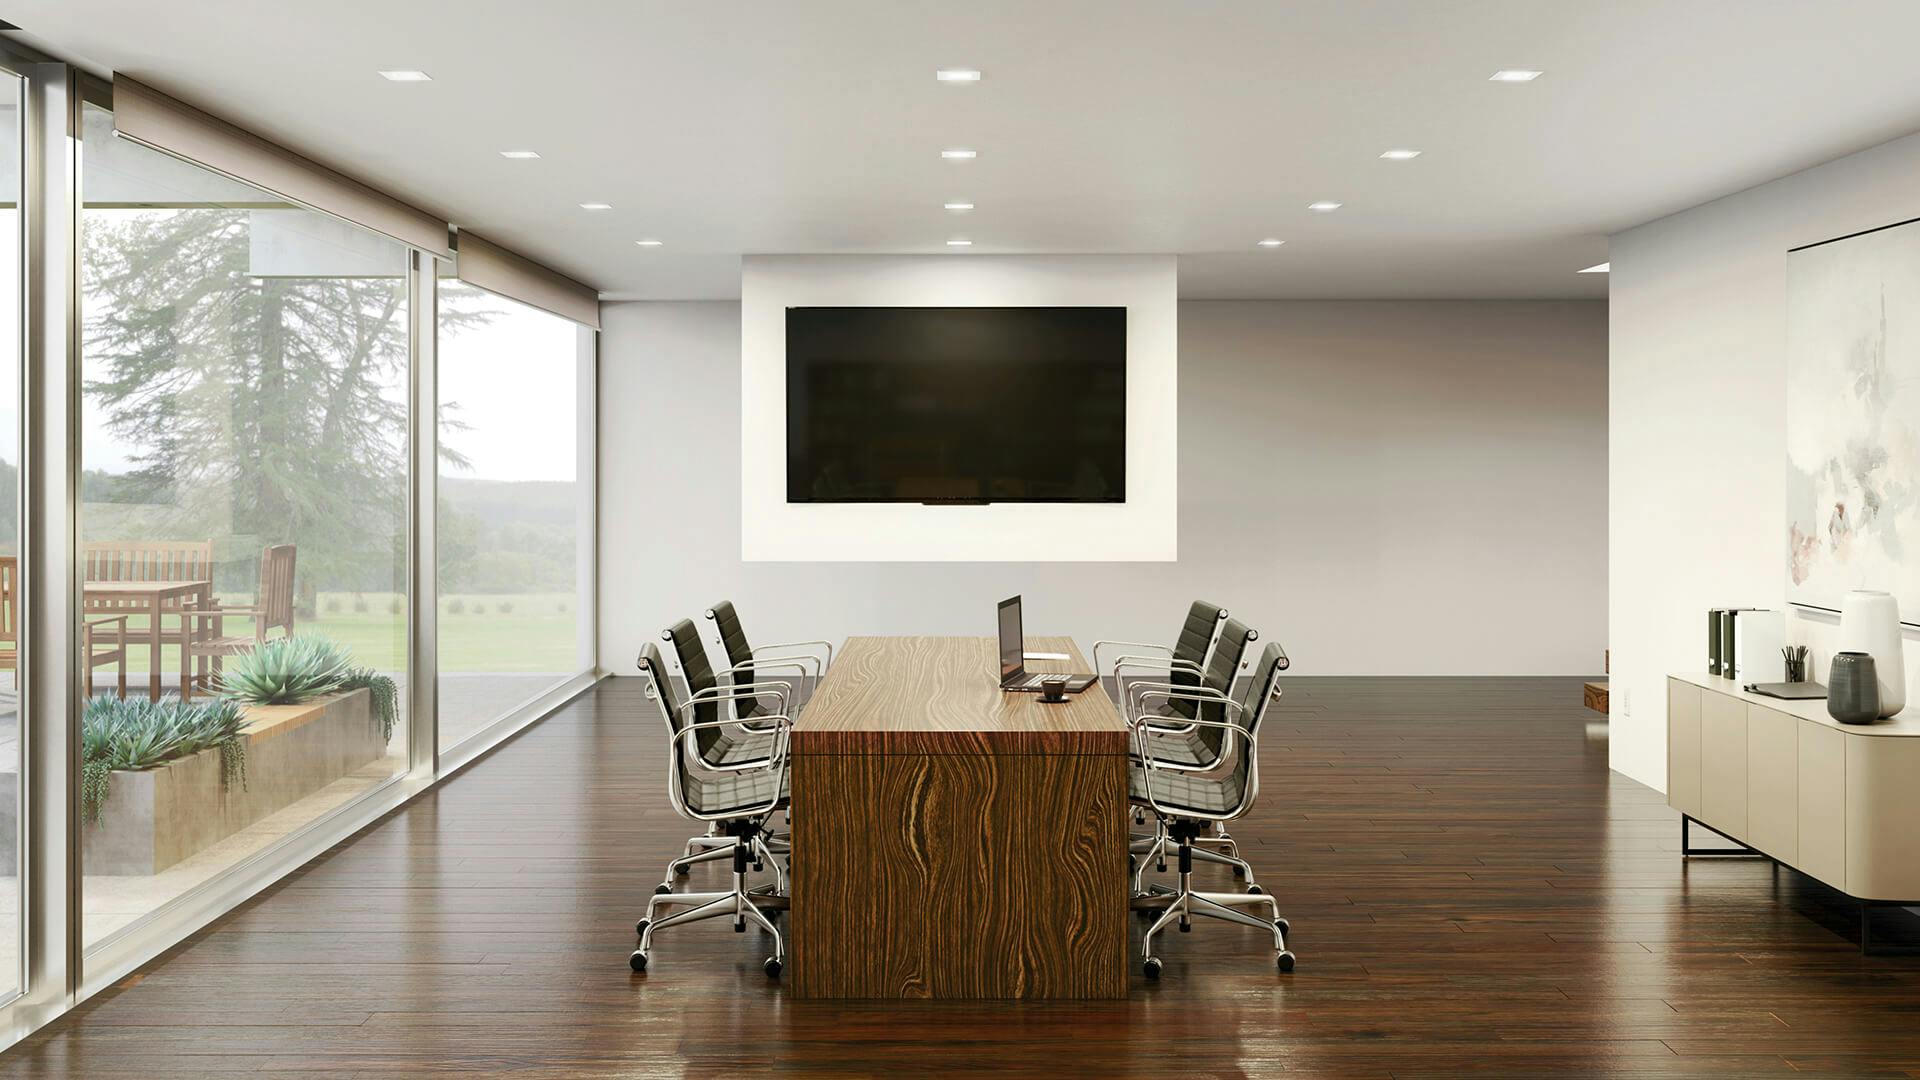 Large conference room with dark wood flooring and tables, featuring ceiling lights